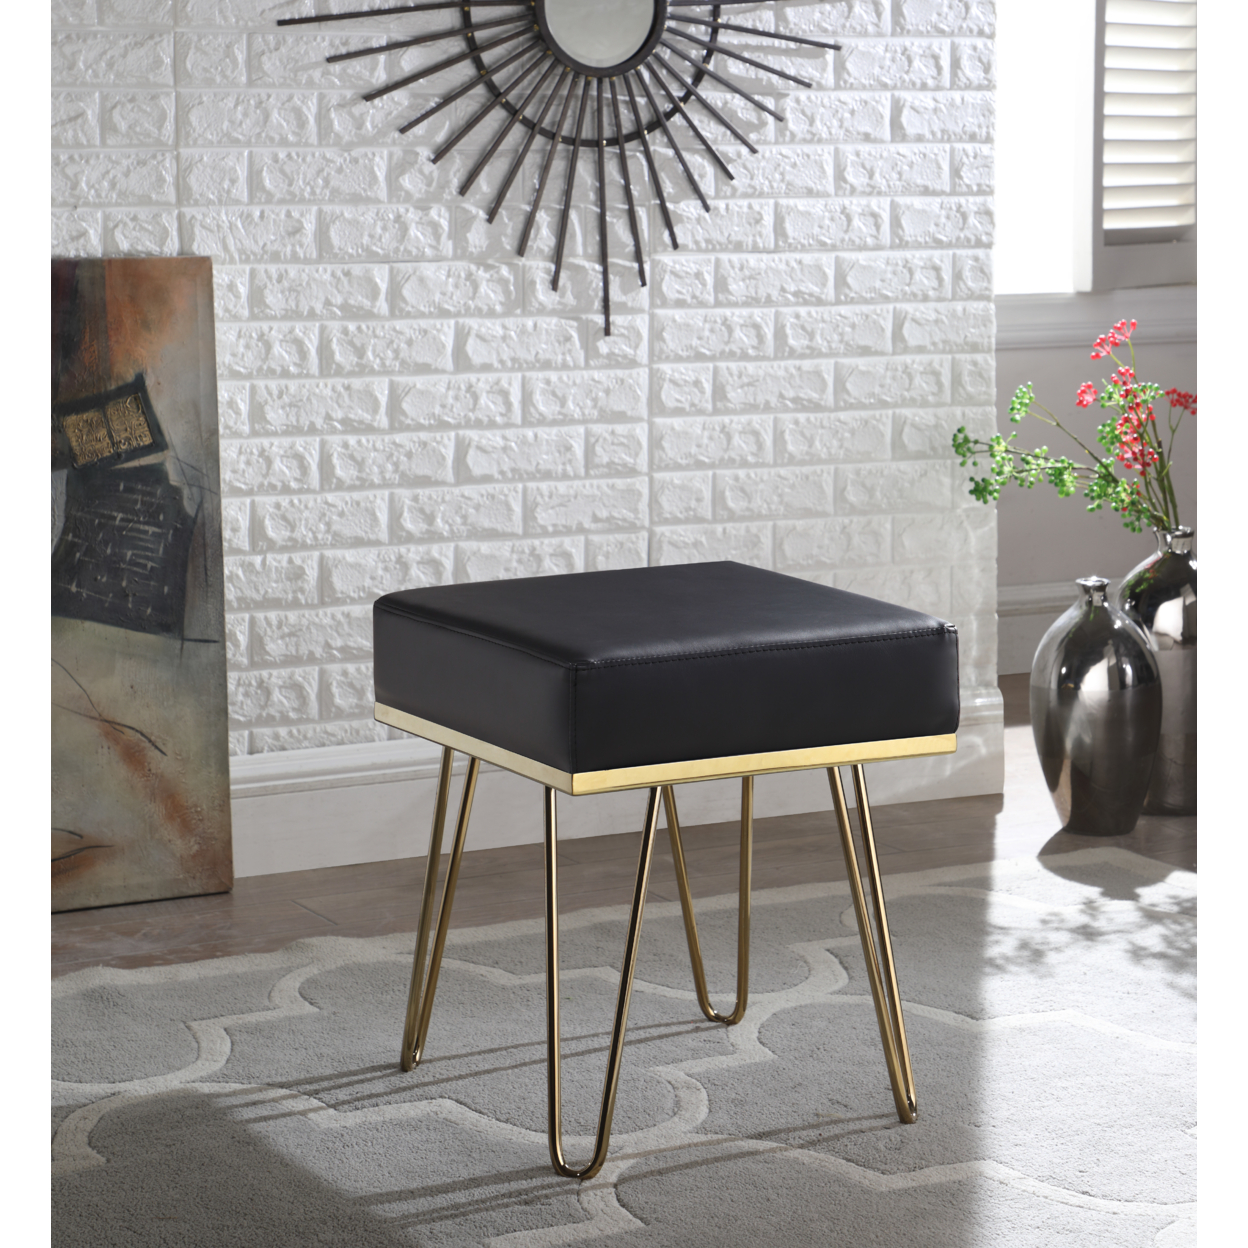 Catharin Square Ottoman PU Leather Upholstered Brass Finished Frame Hairpin Legs - Black